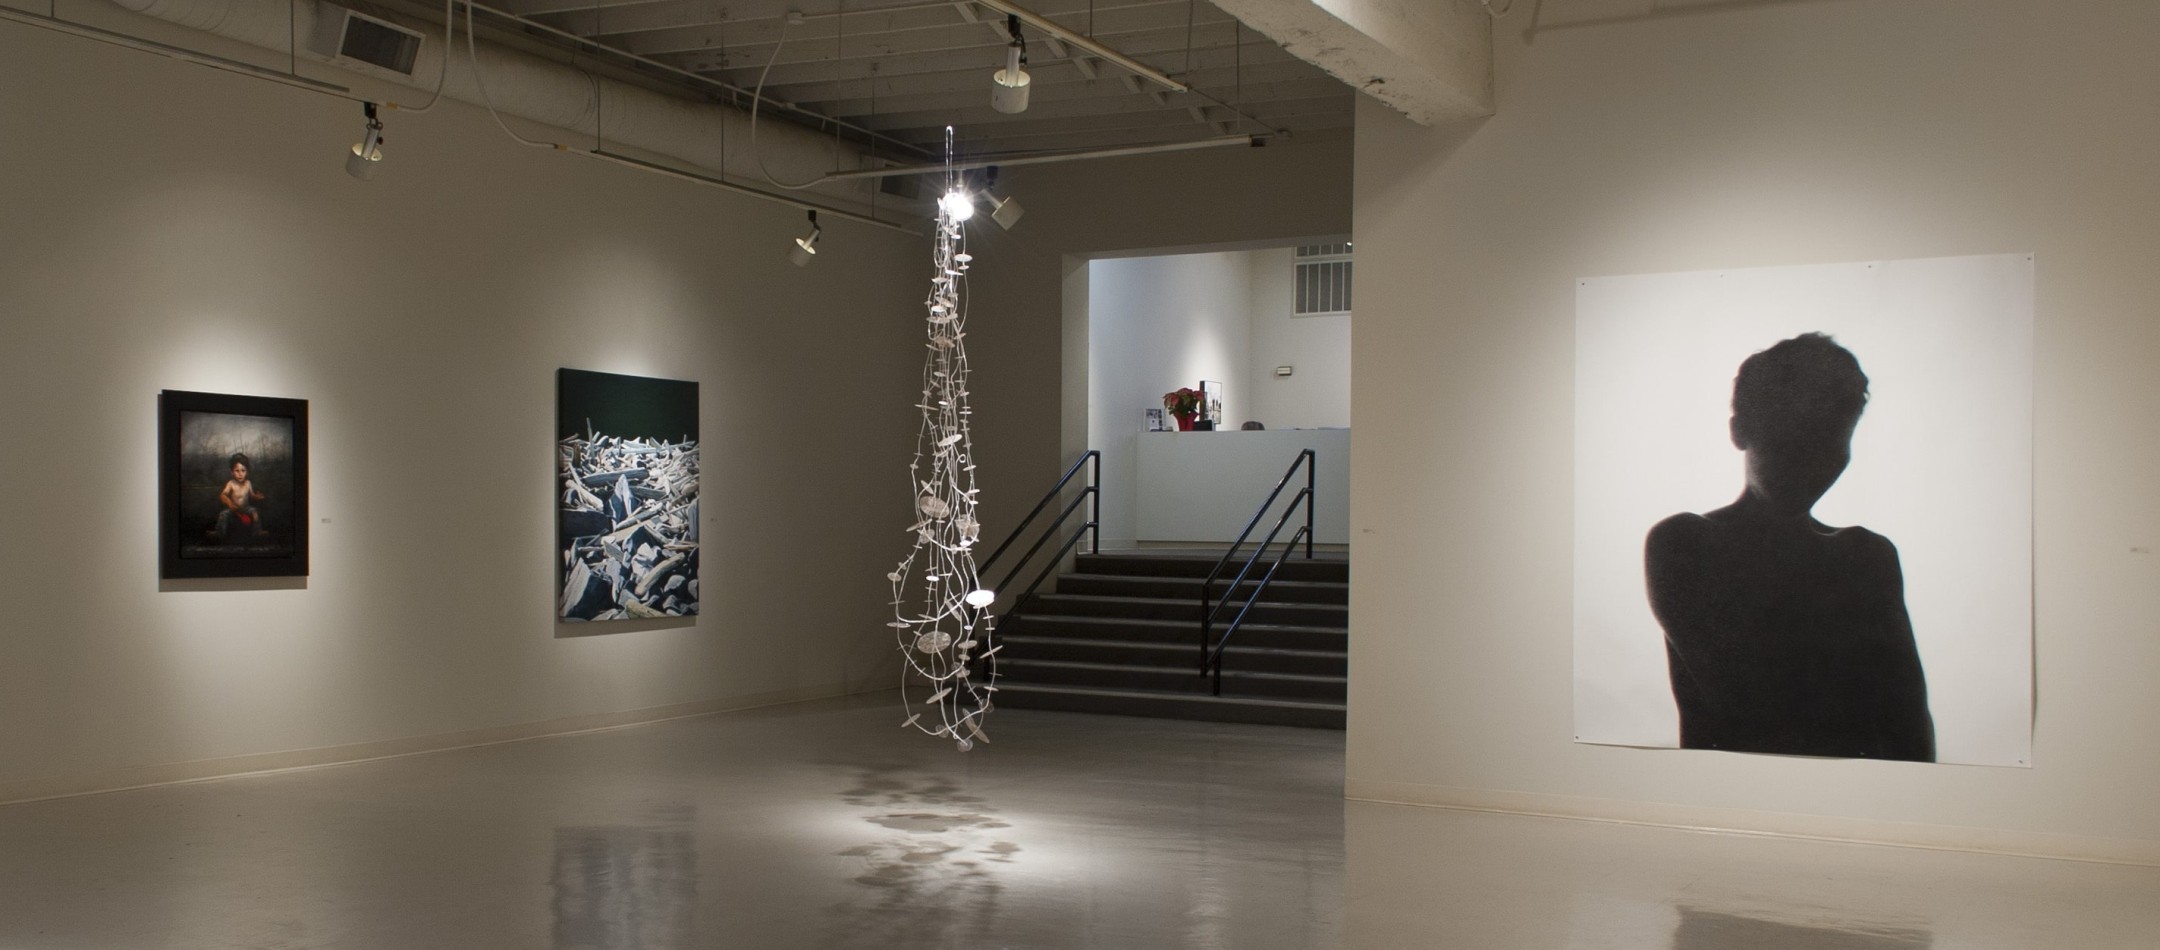 December 2013 Group Show at Laura Russo Gallery Portland Oregon